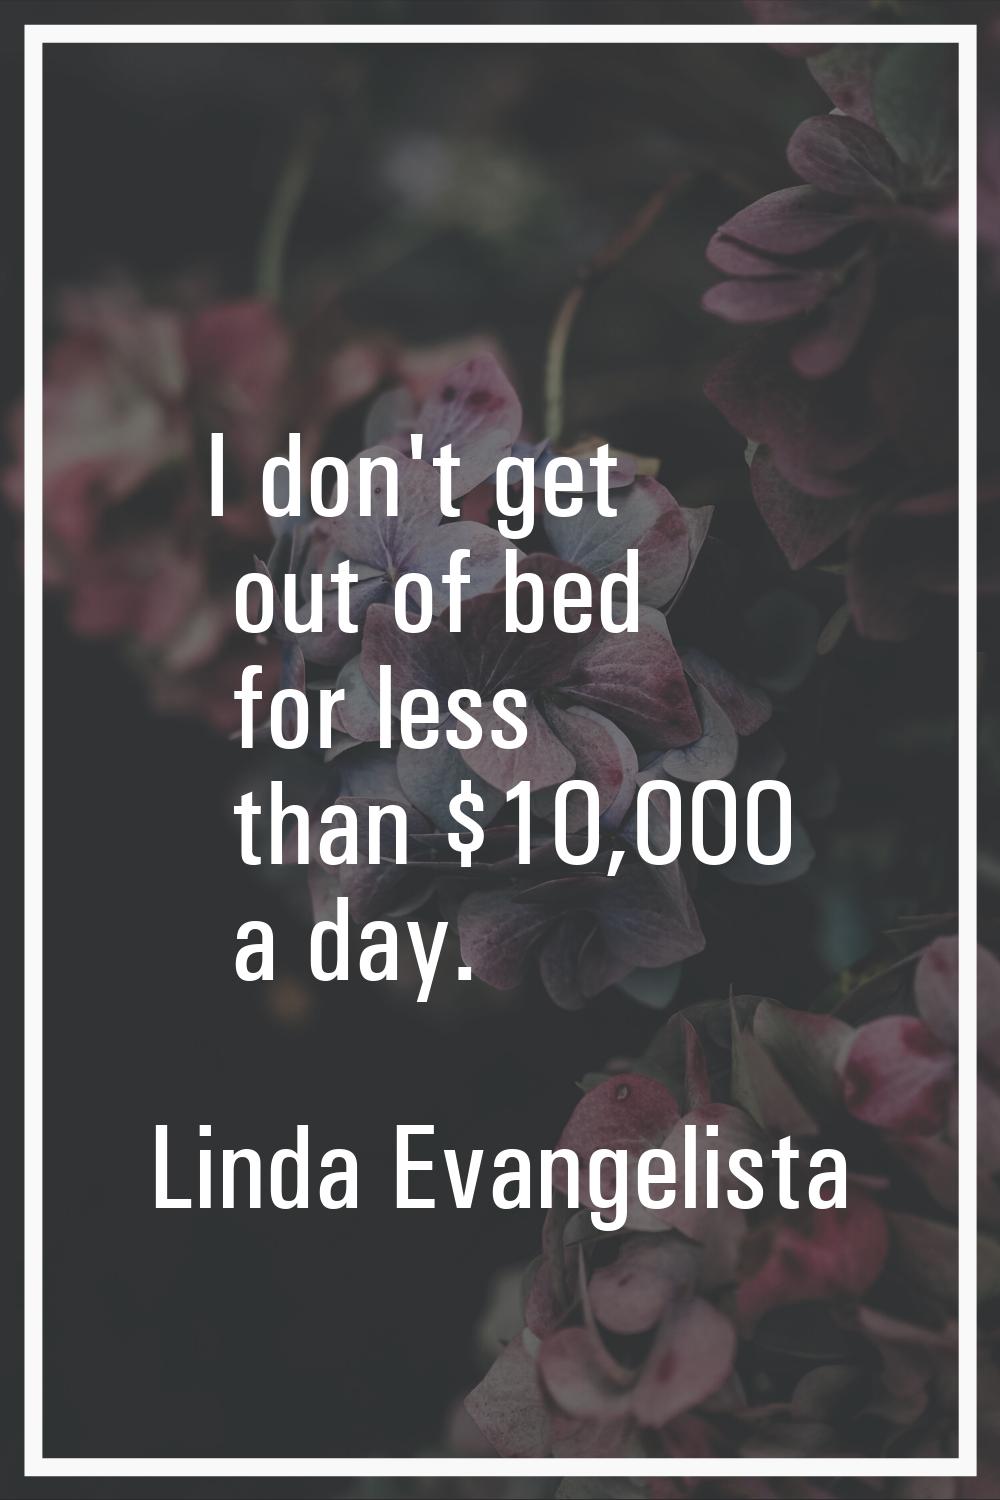 I don't get out of bed for less than $10,000 a day.